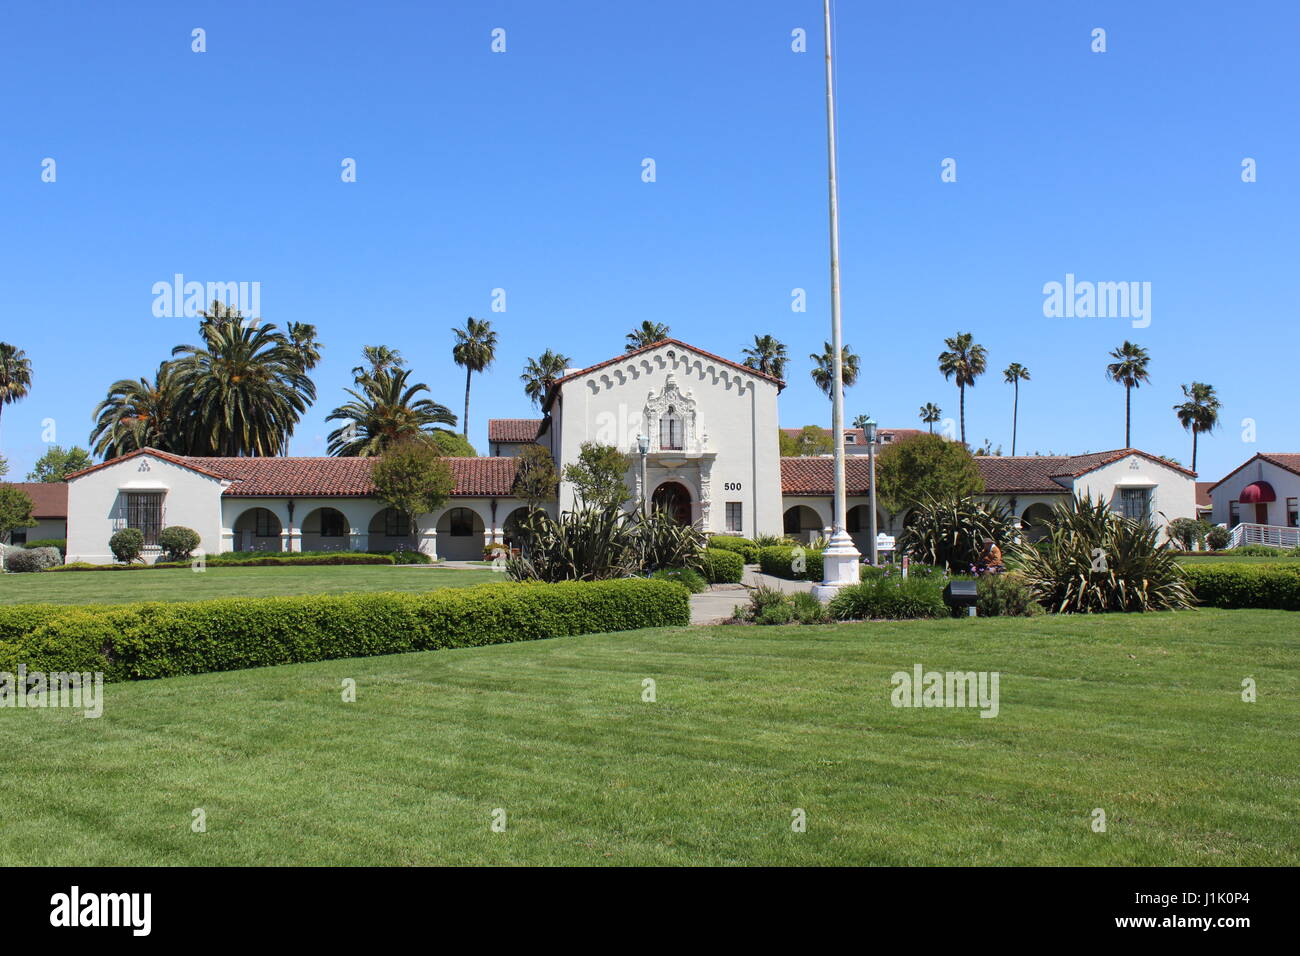 Marin Museum of Contemporary Art, former Headquarters Building at the Hamilton Field Air Force Base in Novato, California Stock Photo